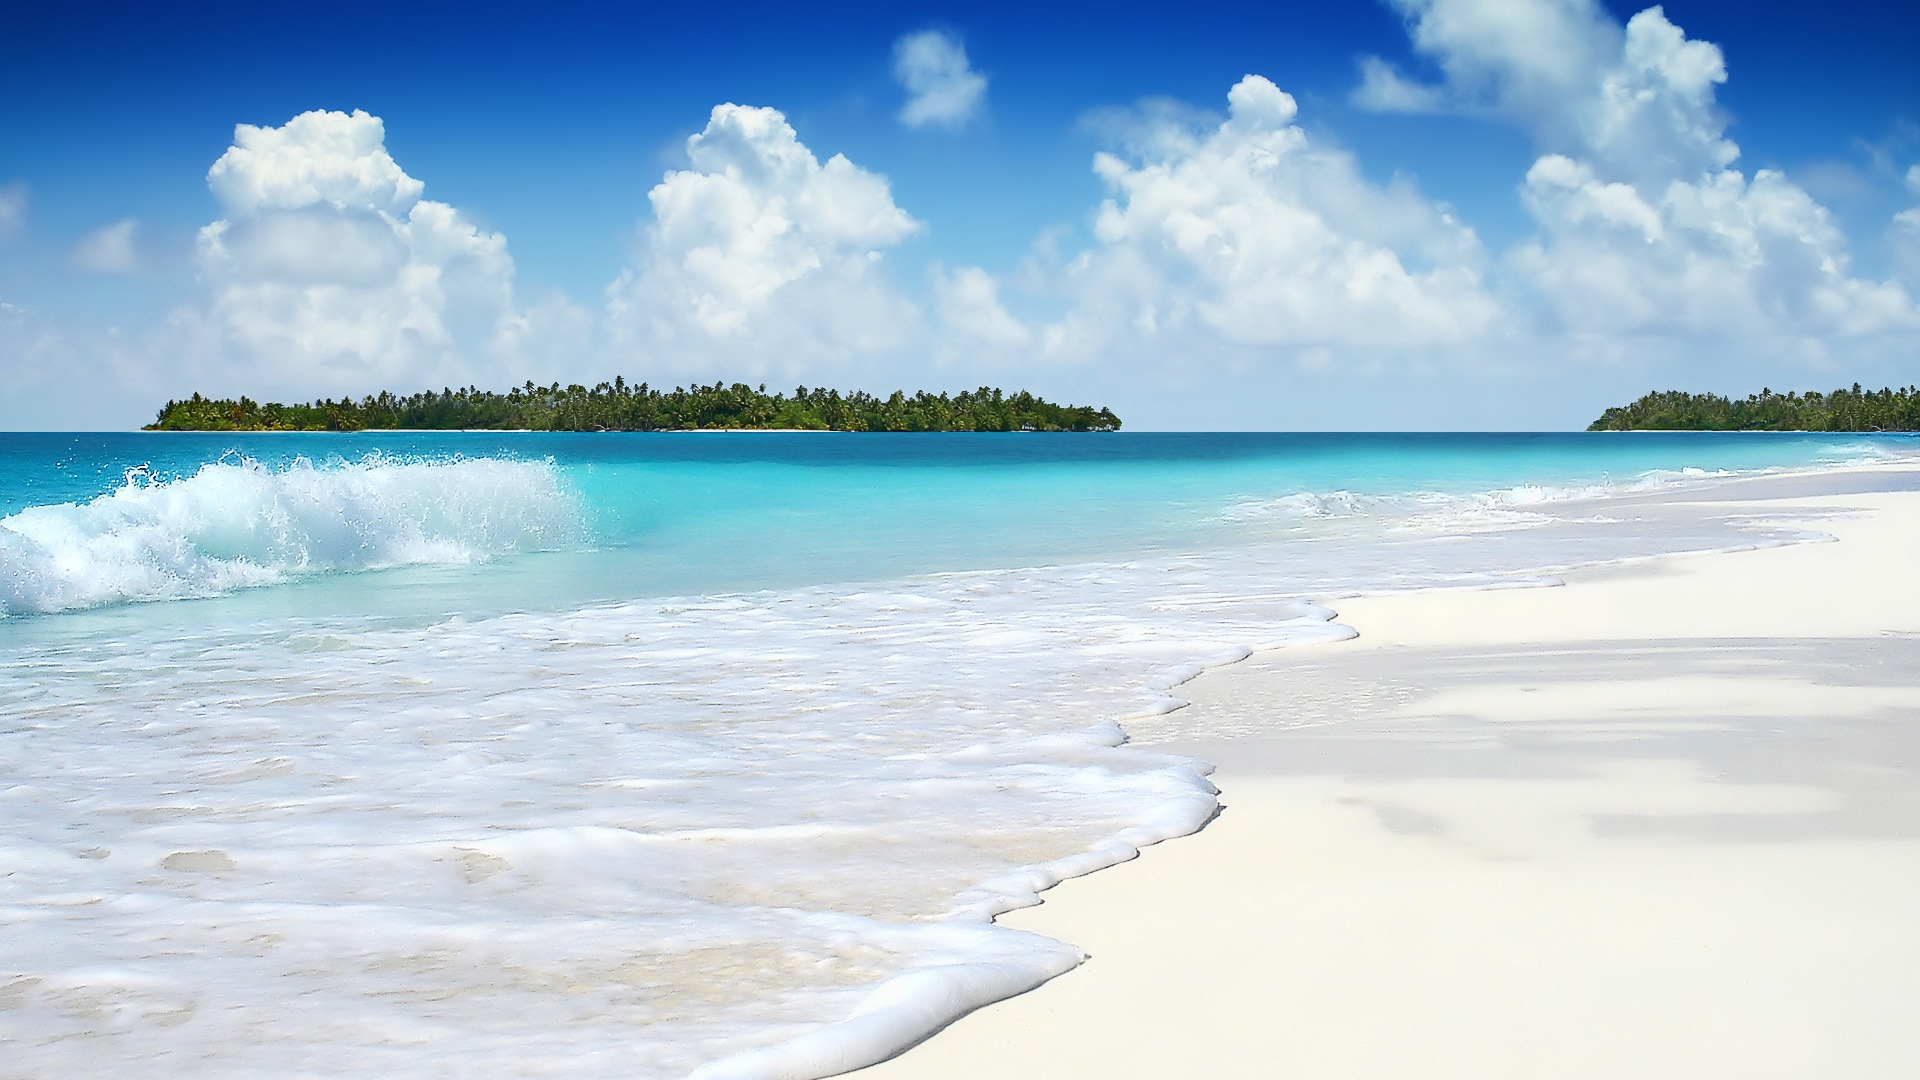 The Beautiful Summer Island for 1920 x 1080 HDTV 1080p resolution